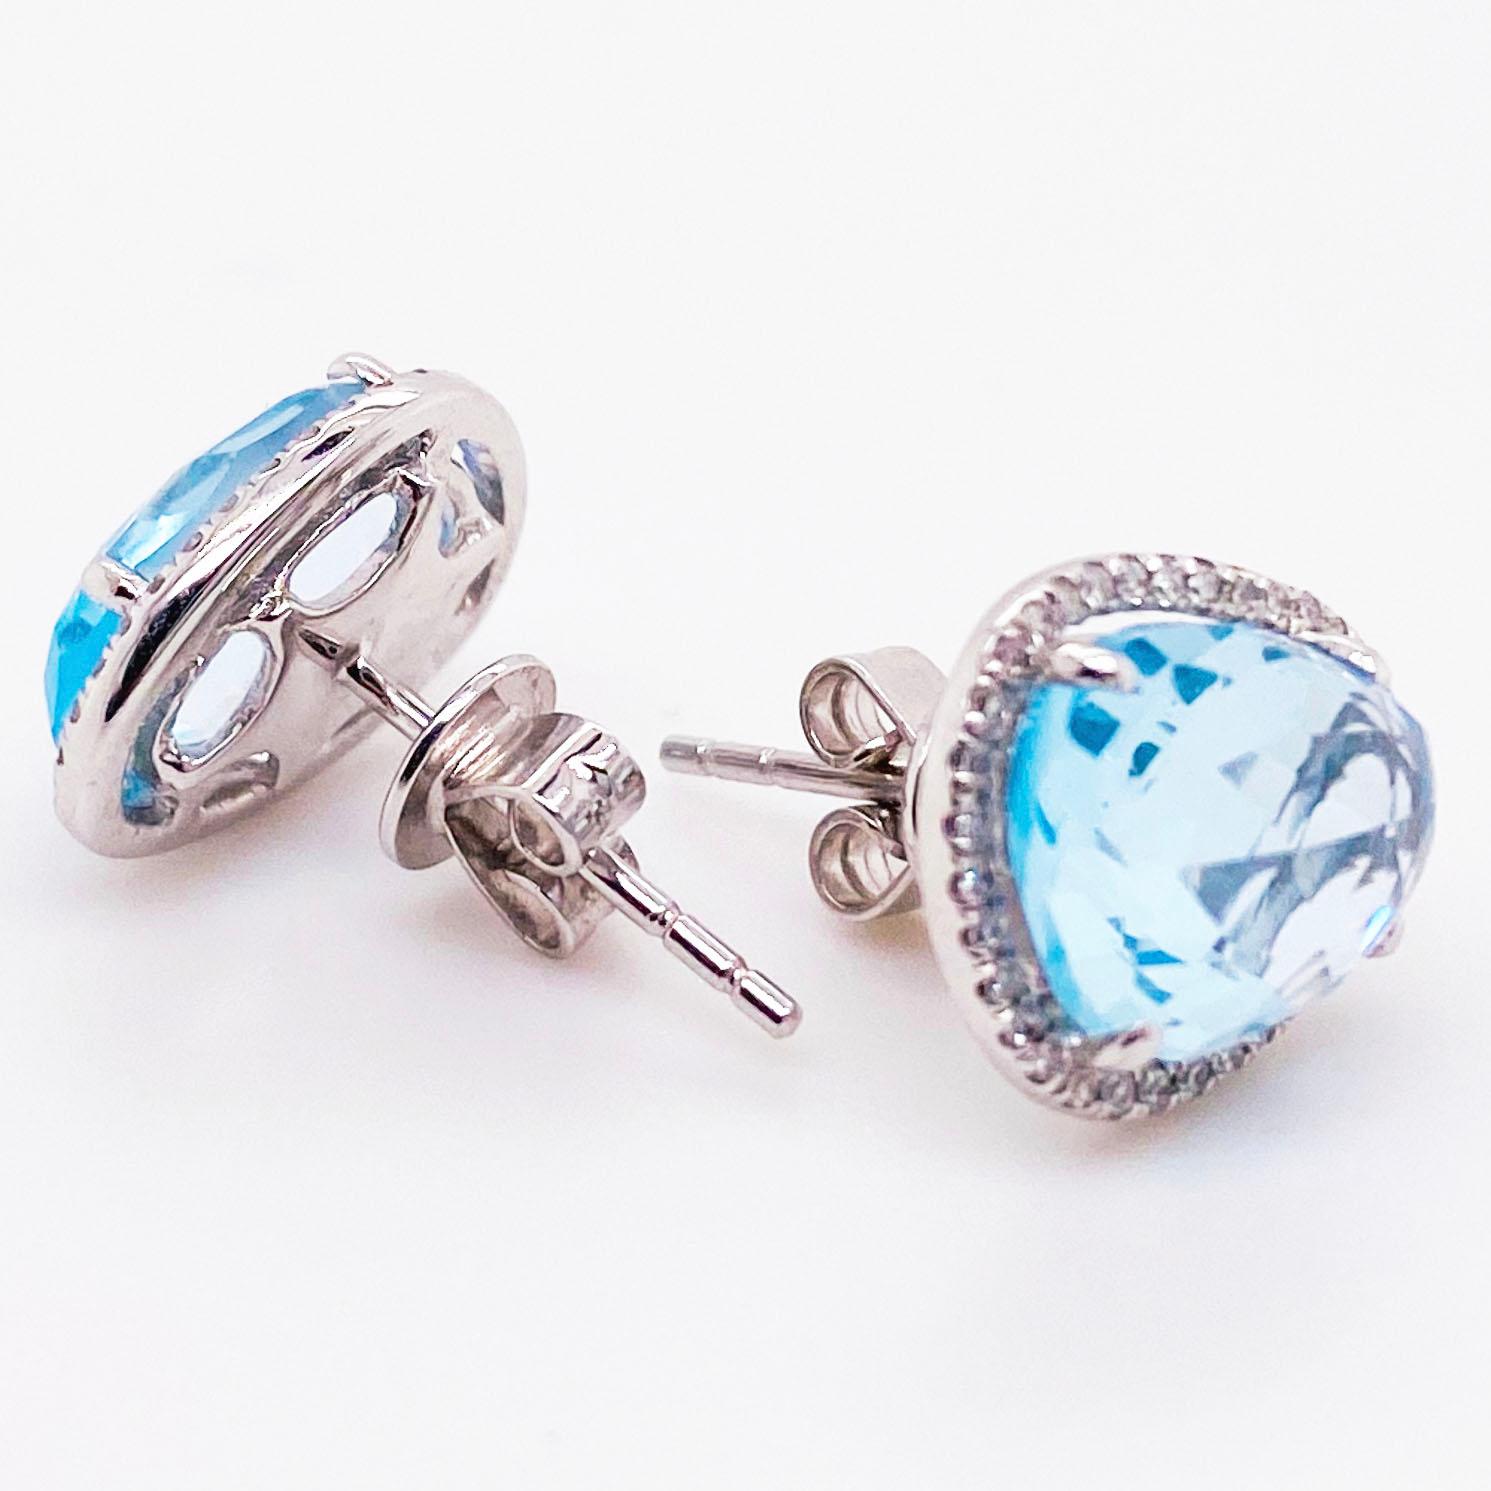 These 14K White Gold Oval Blue Topaz and Diamond Stud Earrings are Magnificient!  Topaz served as a symbol of strength among the Greeks.  Europeans at the time of the Renaissance bevies in its power to destroy curses and dispel anger.  These earring